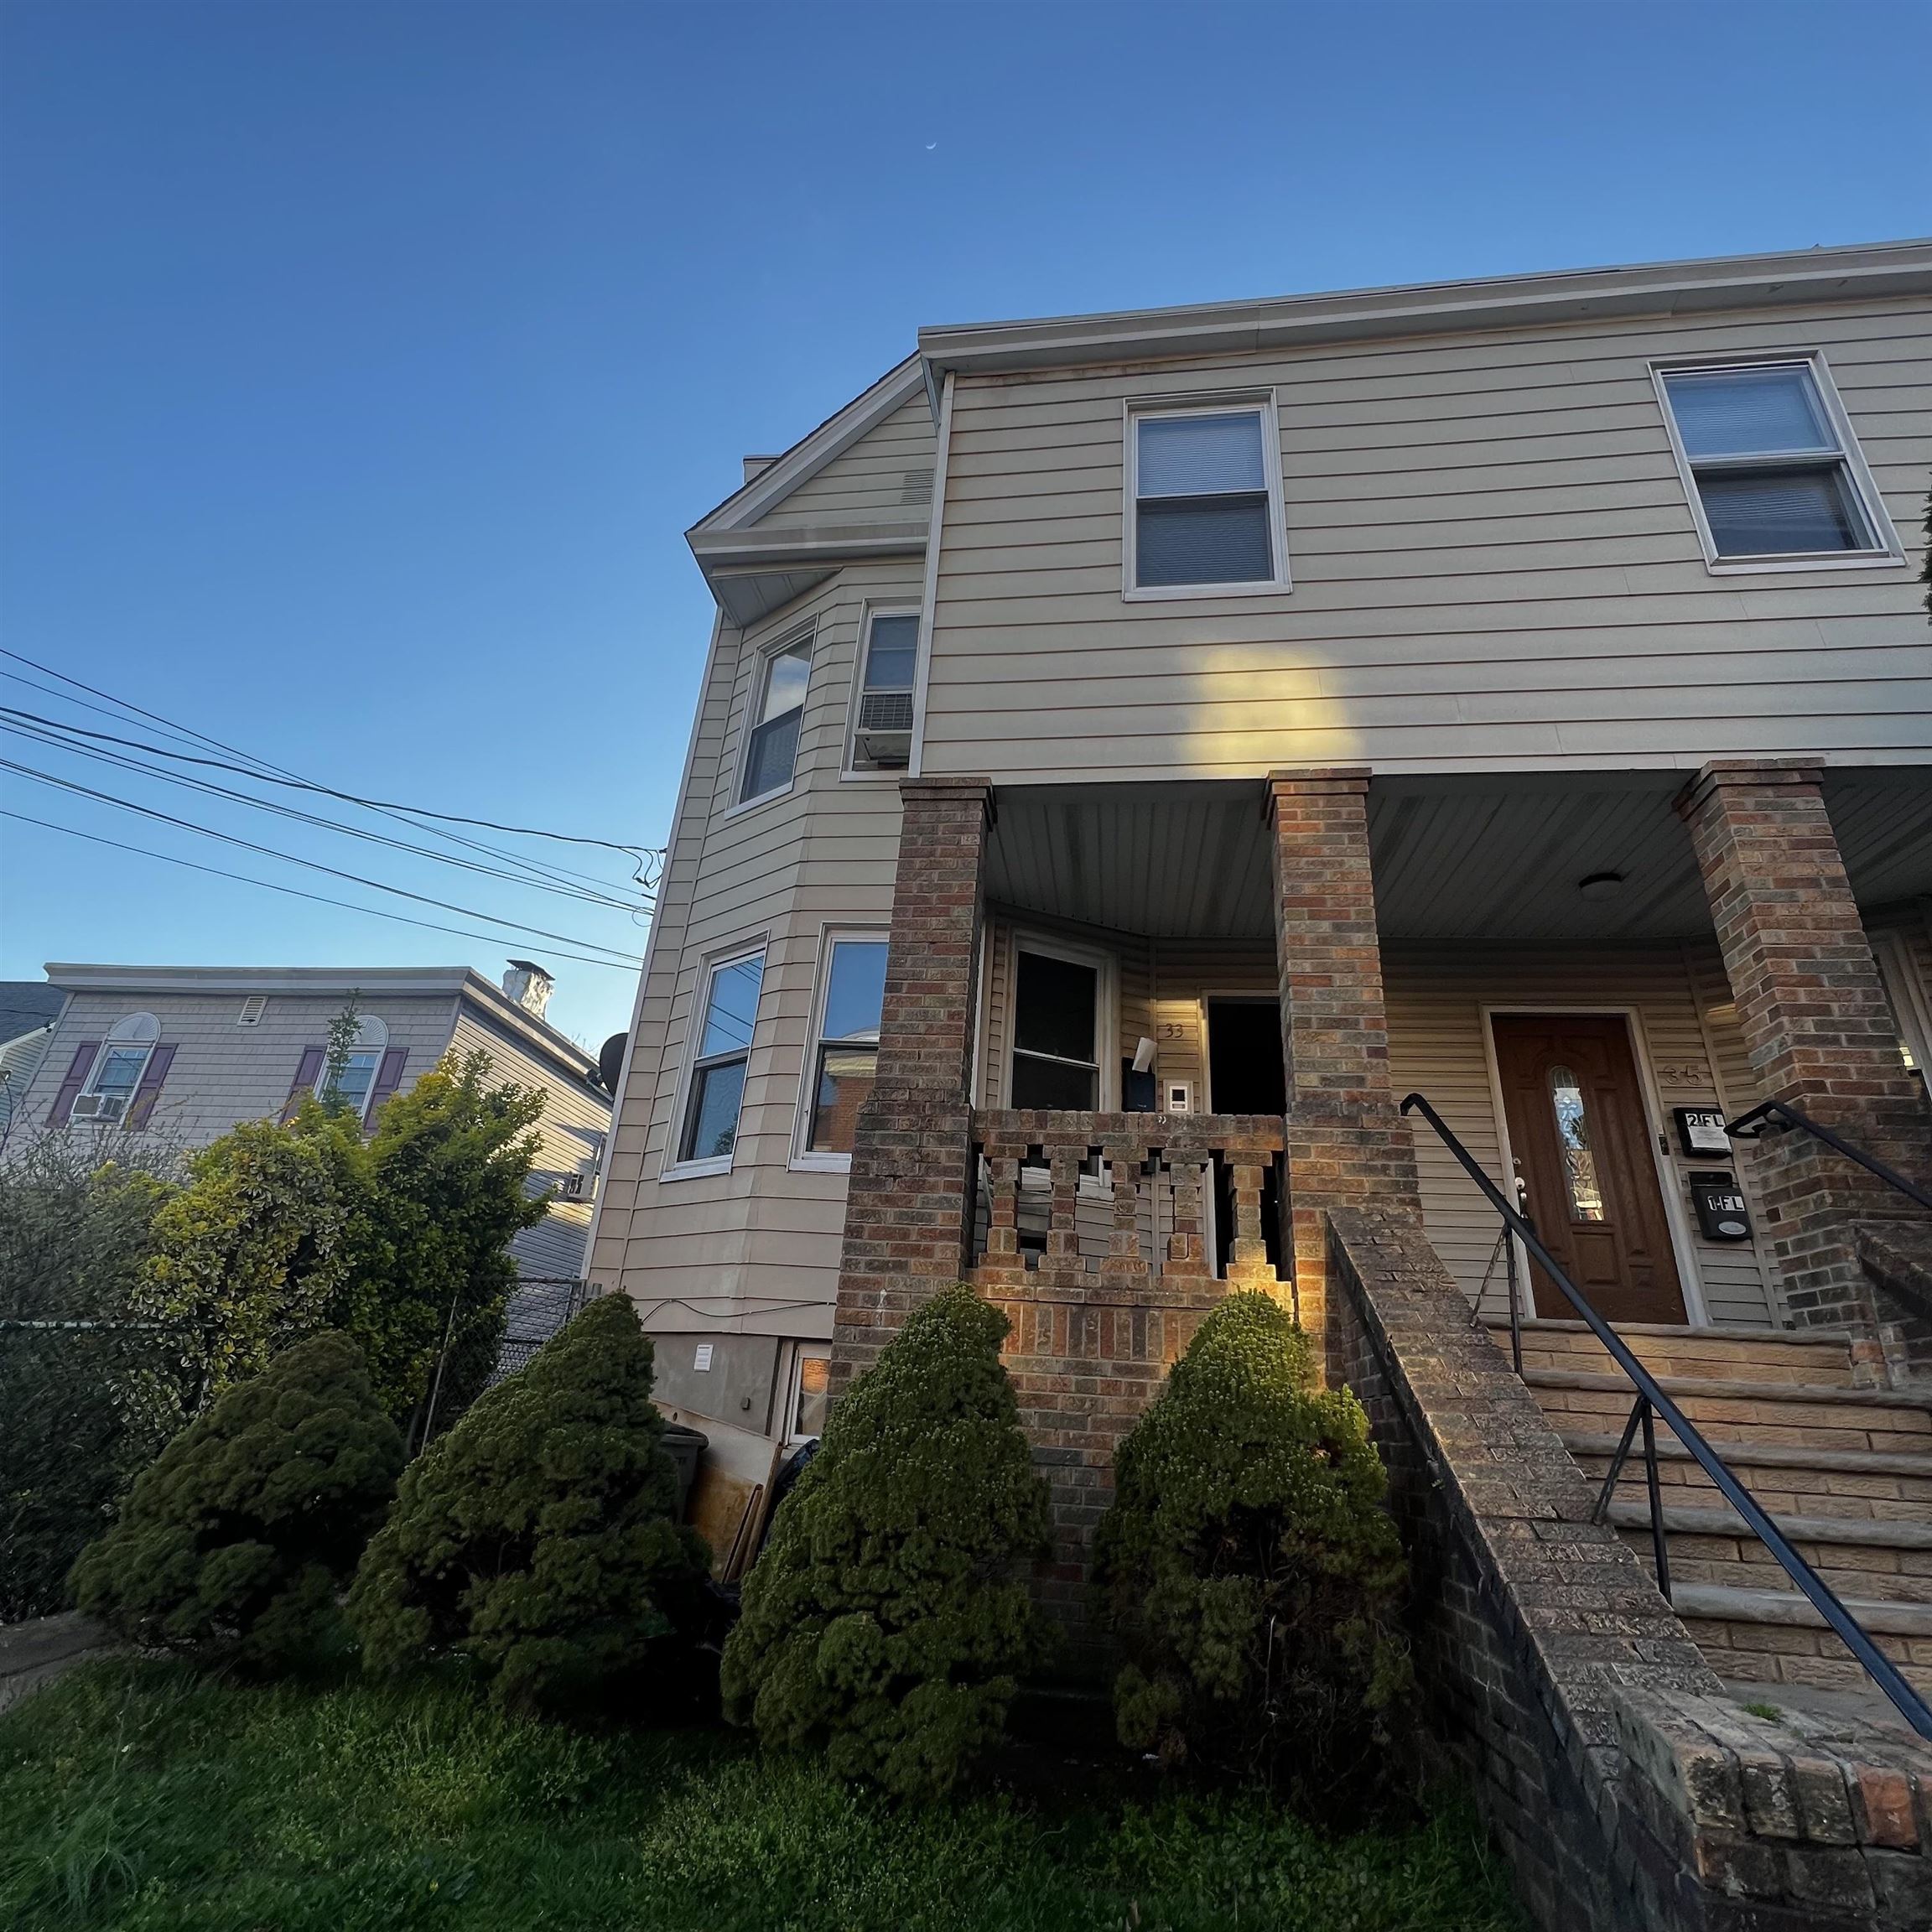 # 240008630 - For Rent in Bayonne NJ